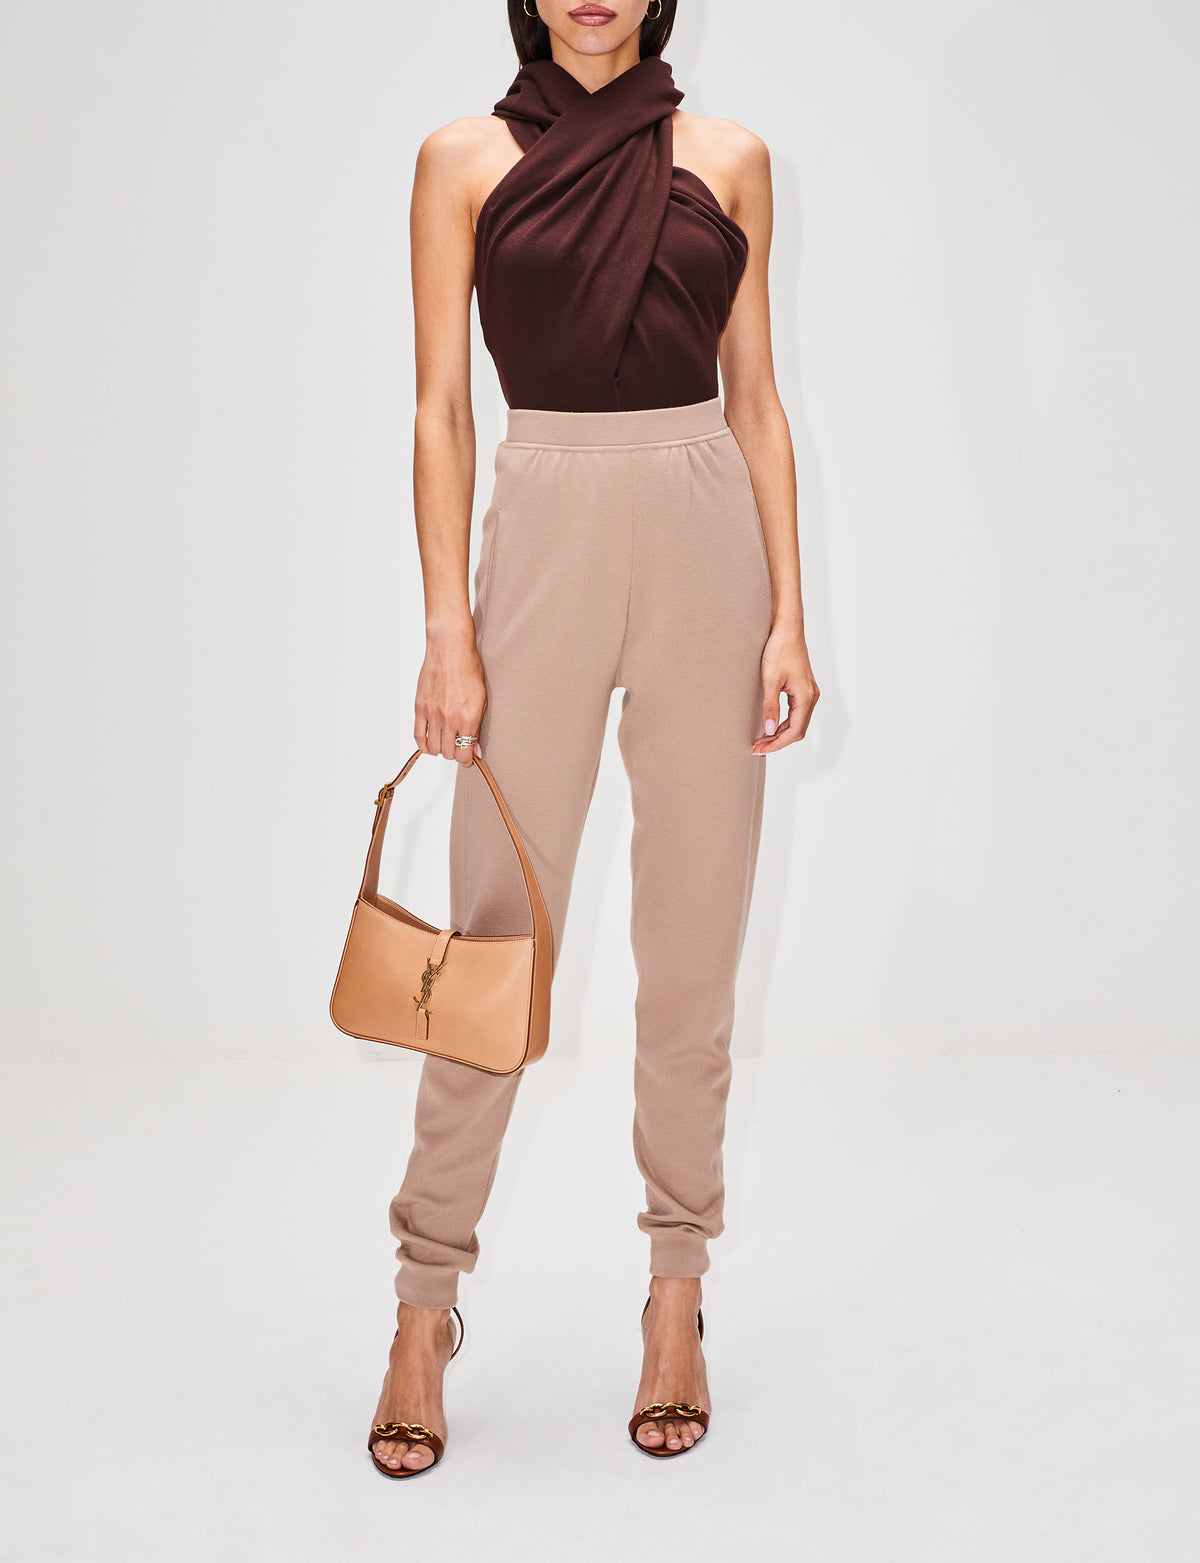 Plunge-neck leather tank top in brown - Saint Laurent